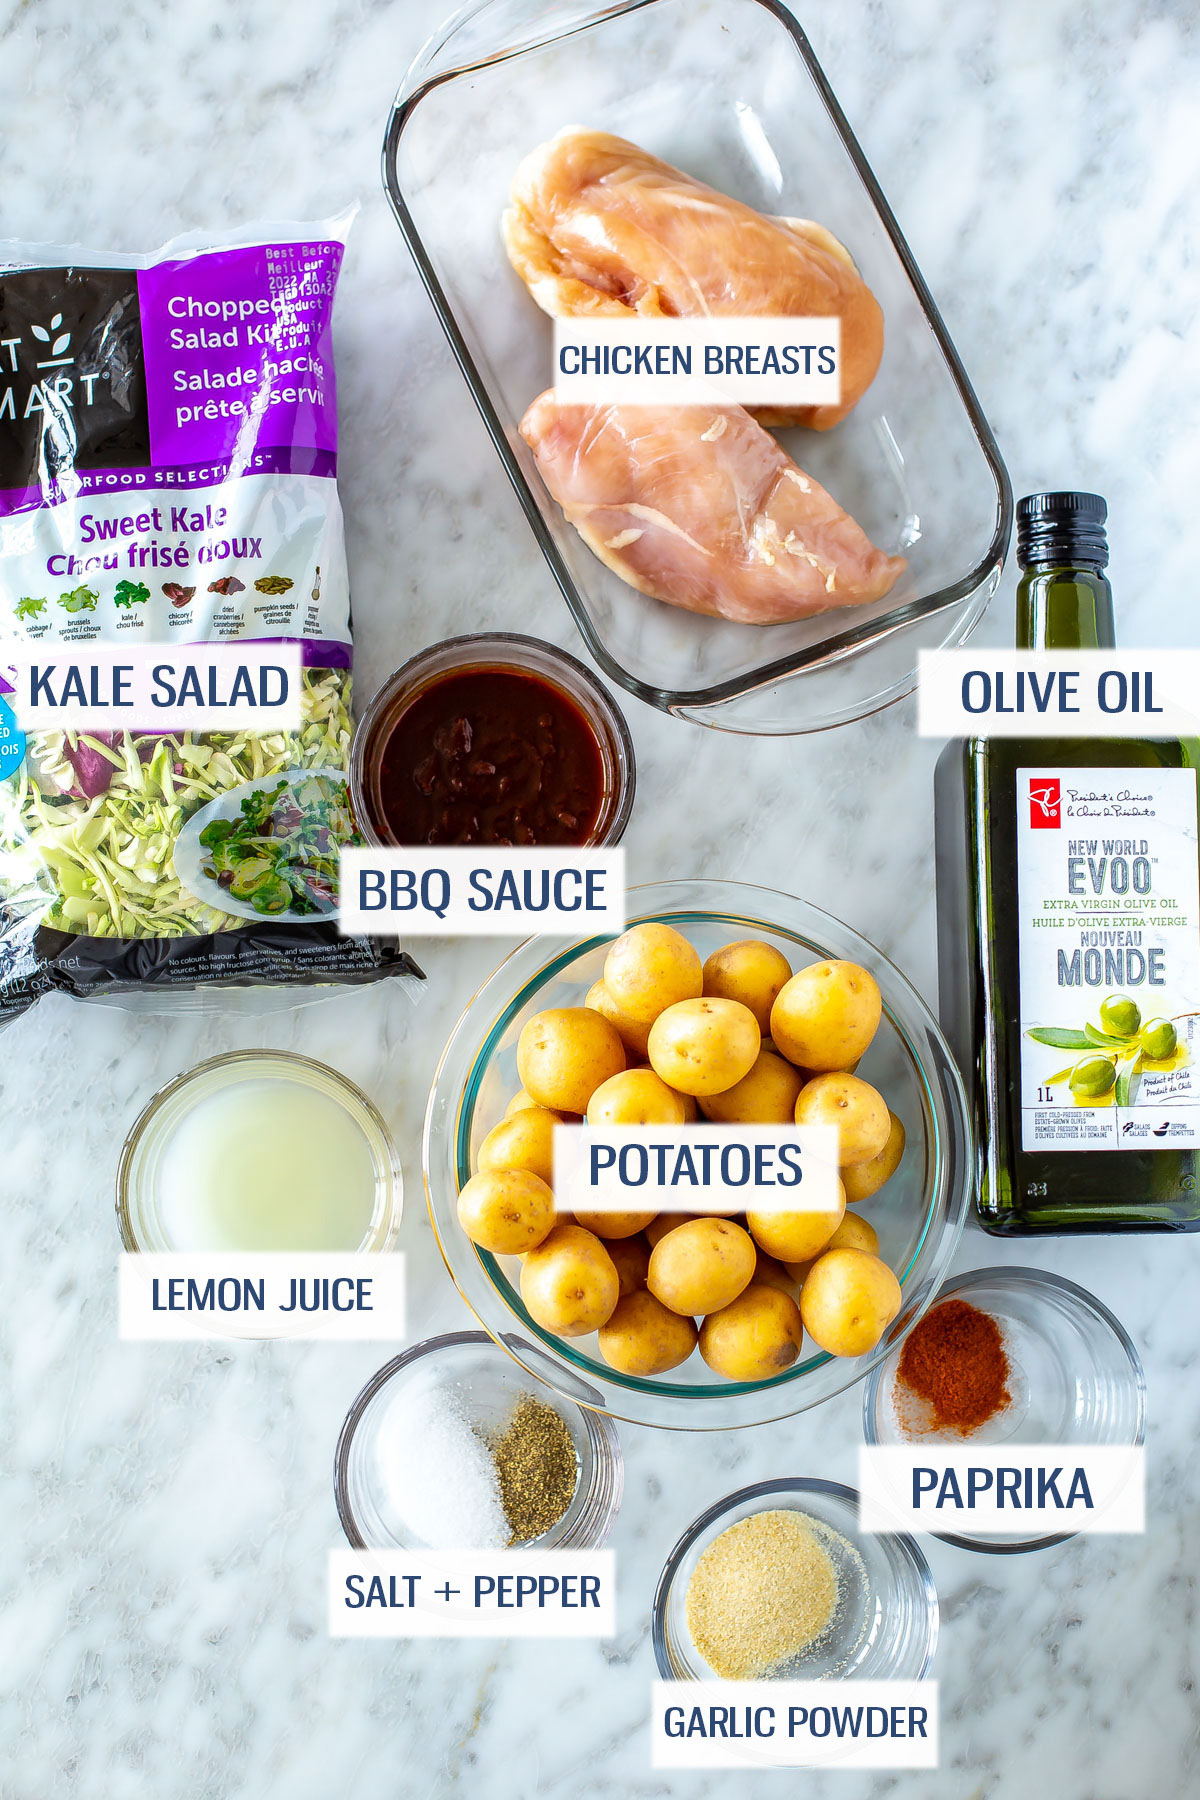 Ingredients for baked BBQ chicken meal prep: chicken breasts, kale salad, bbq sauce, olive oil, lemon juice, baby potatoes, paprika, garlic powder, and salt and pepper.